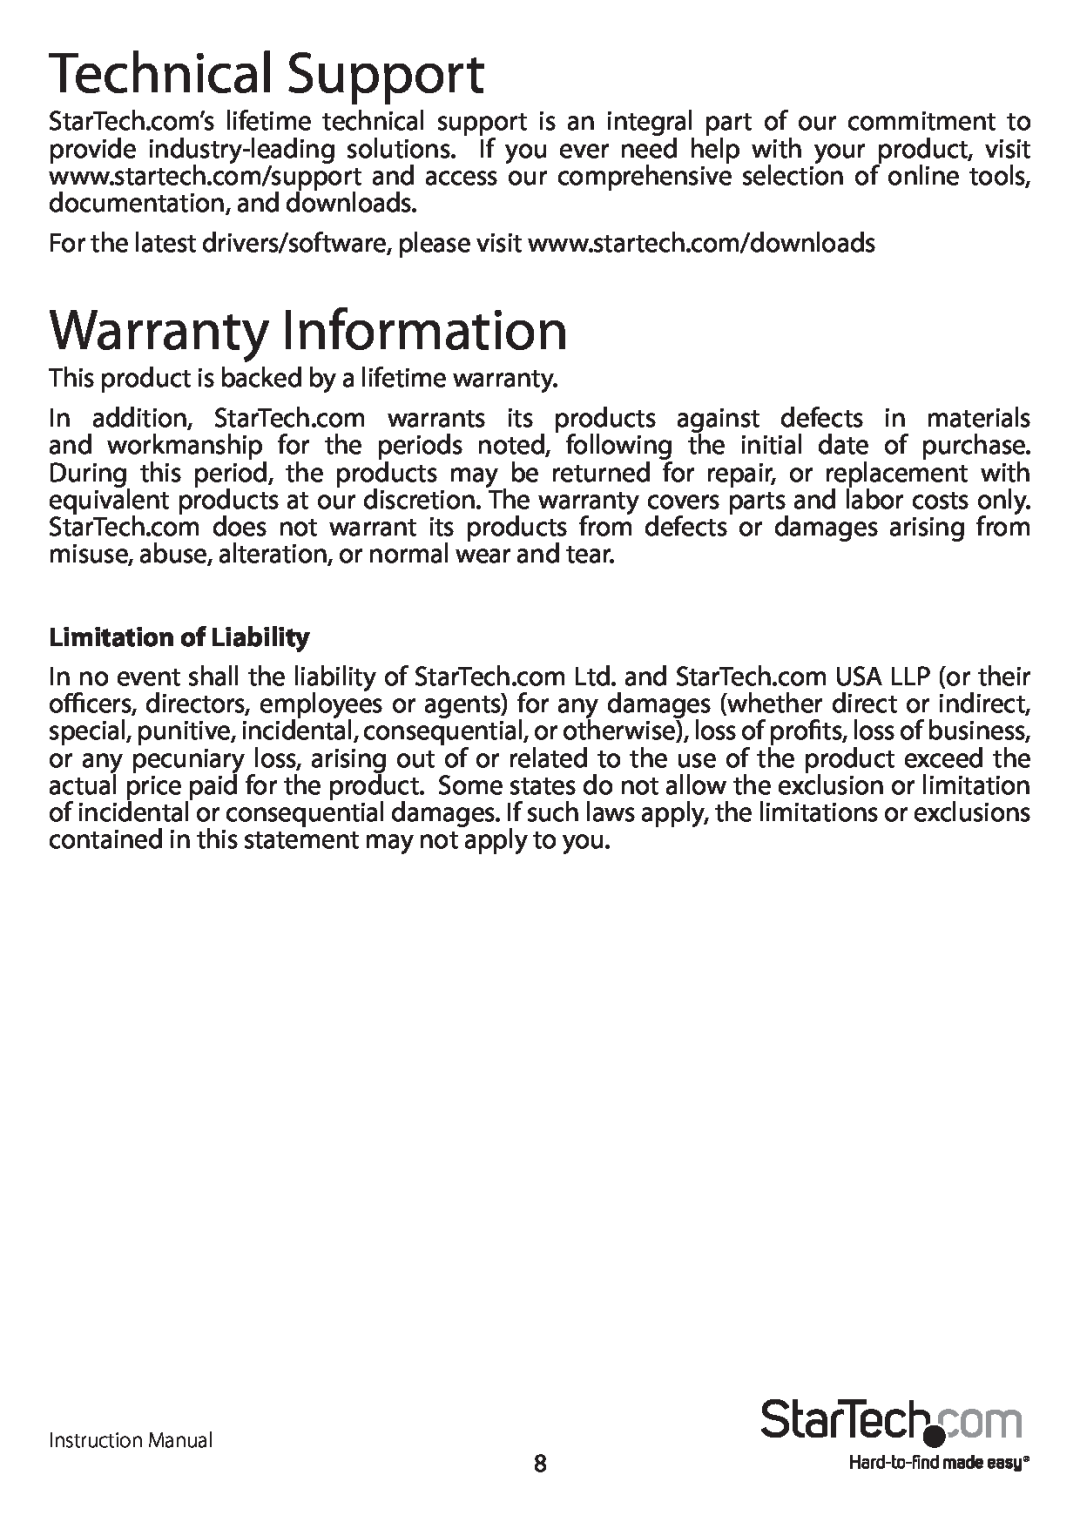 StarTech.com PCI2S232485I manual Technical Support, Warranty Information, Limitation of Liability 